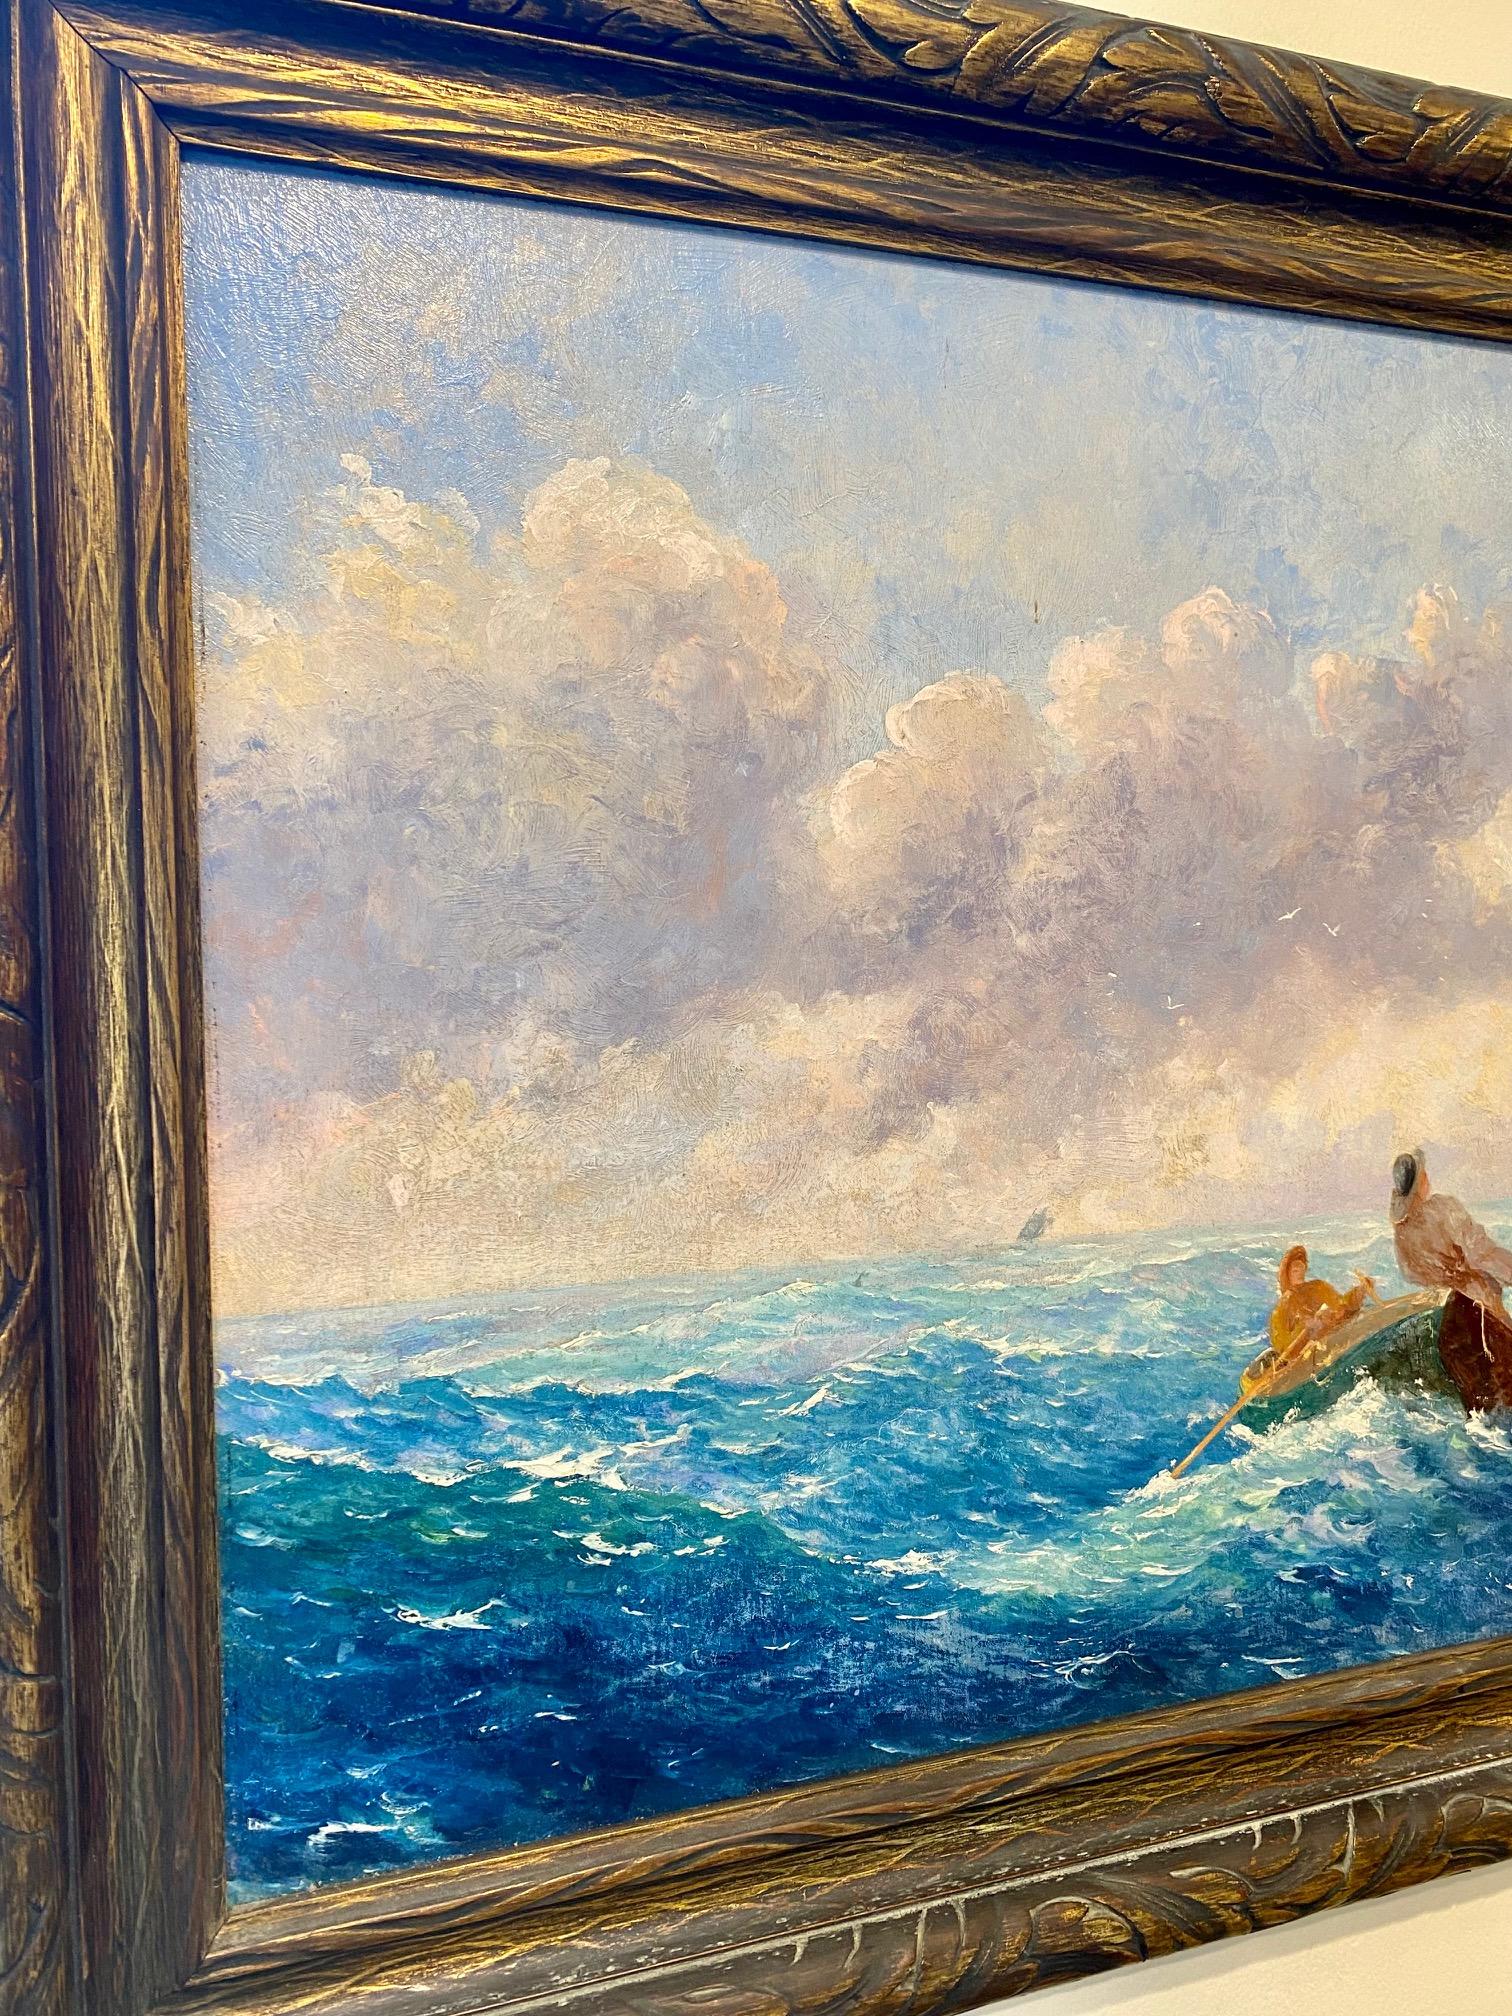 Antique grand banks dory fishermen seascape by Joseph A. Woods, circa 1910, an impressionist oil on panel seascape with two fishermen in dory in the foreground hauling back on their trawl line, the bright red line buoy flashing in the brilliantly